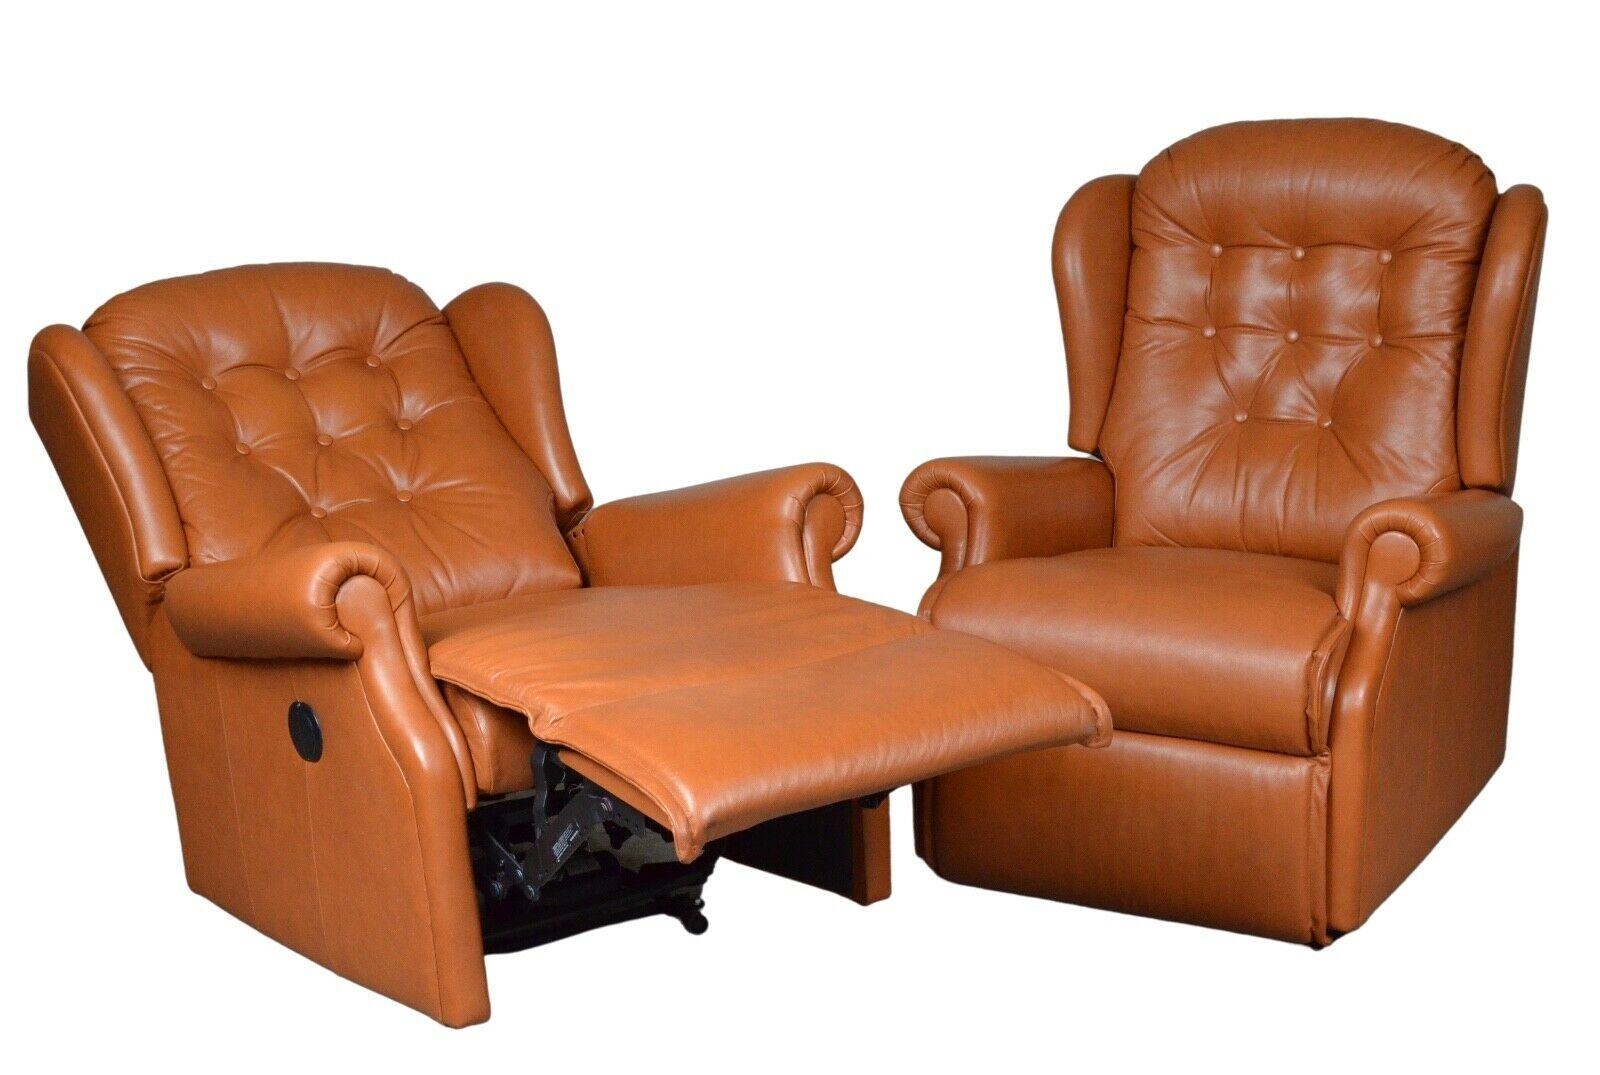 We are delighted to offer for sale this senator electric recliner armchair, which combines the functionality of the classic chair with the quality and detail of a Chesterfield piece. The curved, high, hand-buttoned back and injection-moulded foam